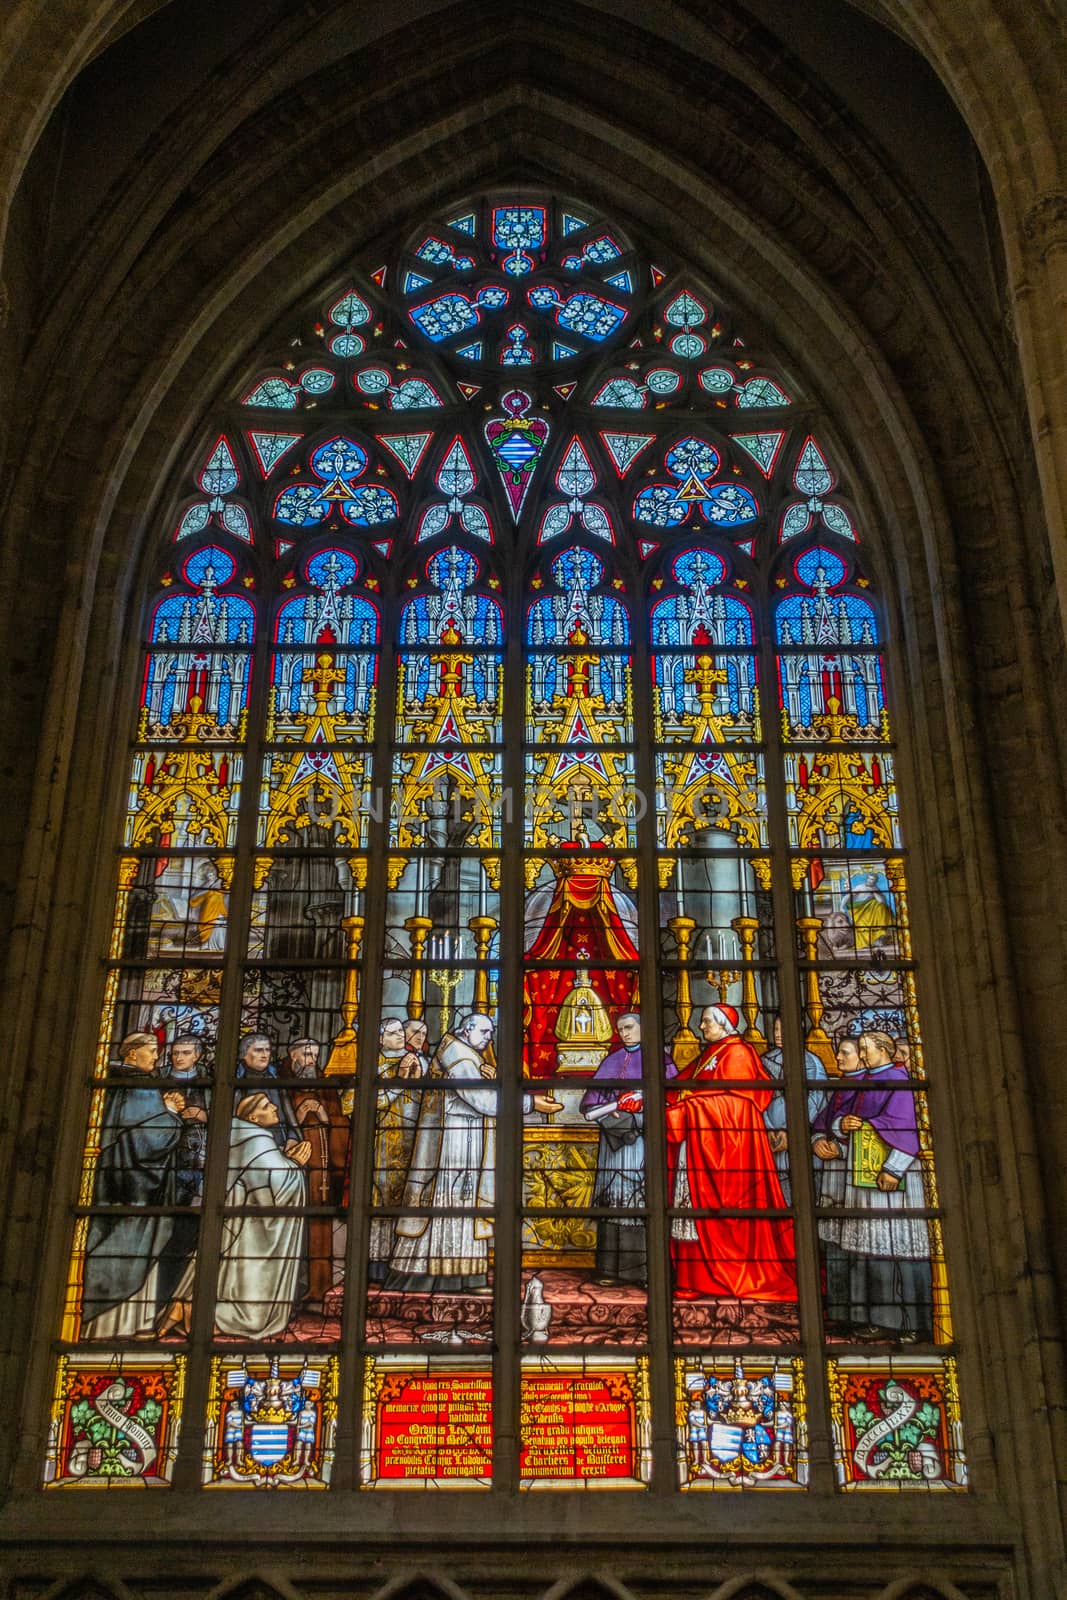 Stained glass window of Cathedral of St. Michael and St, Gudula, by Claudine